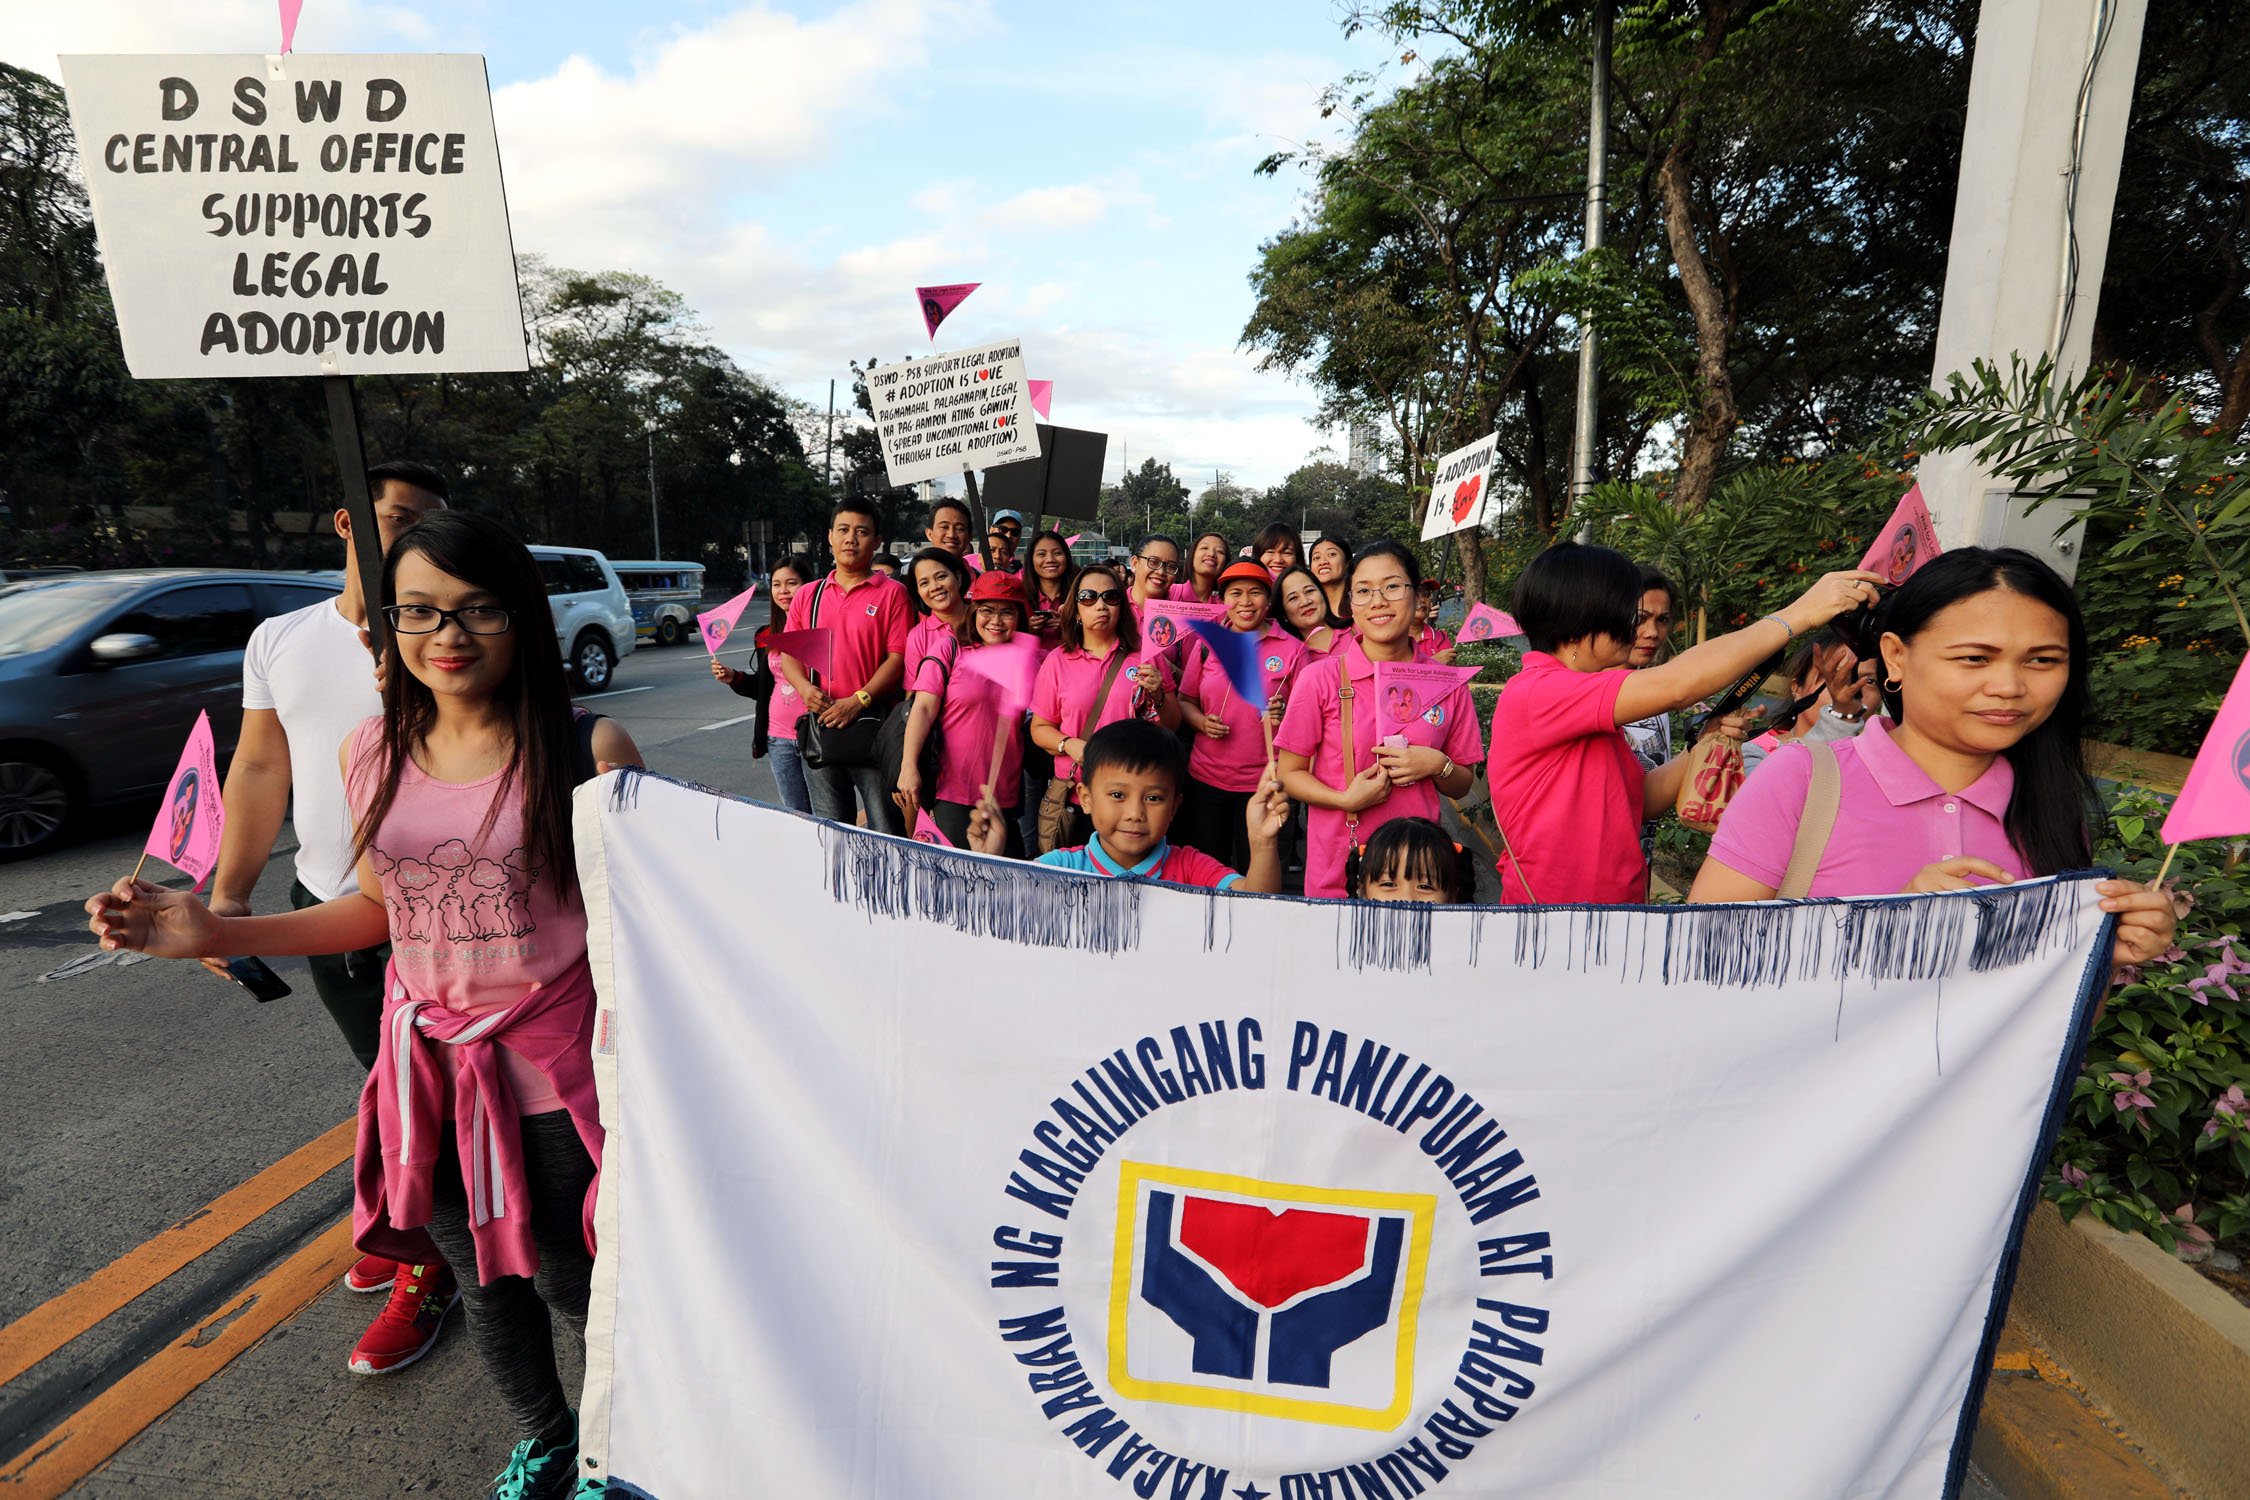 DSWD leads "Walk for Legal Adoption"